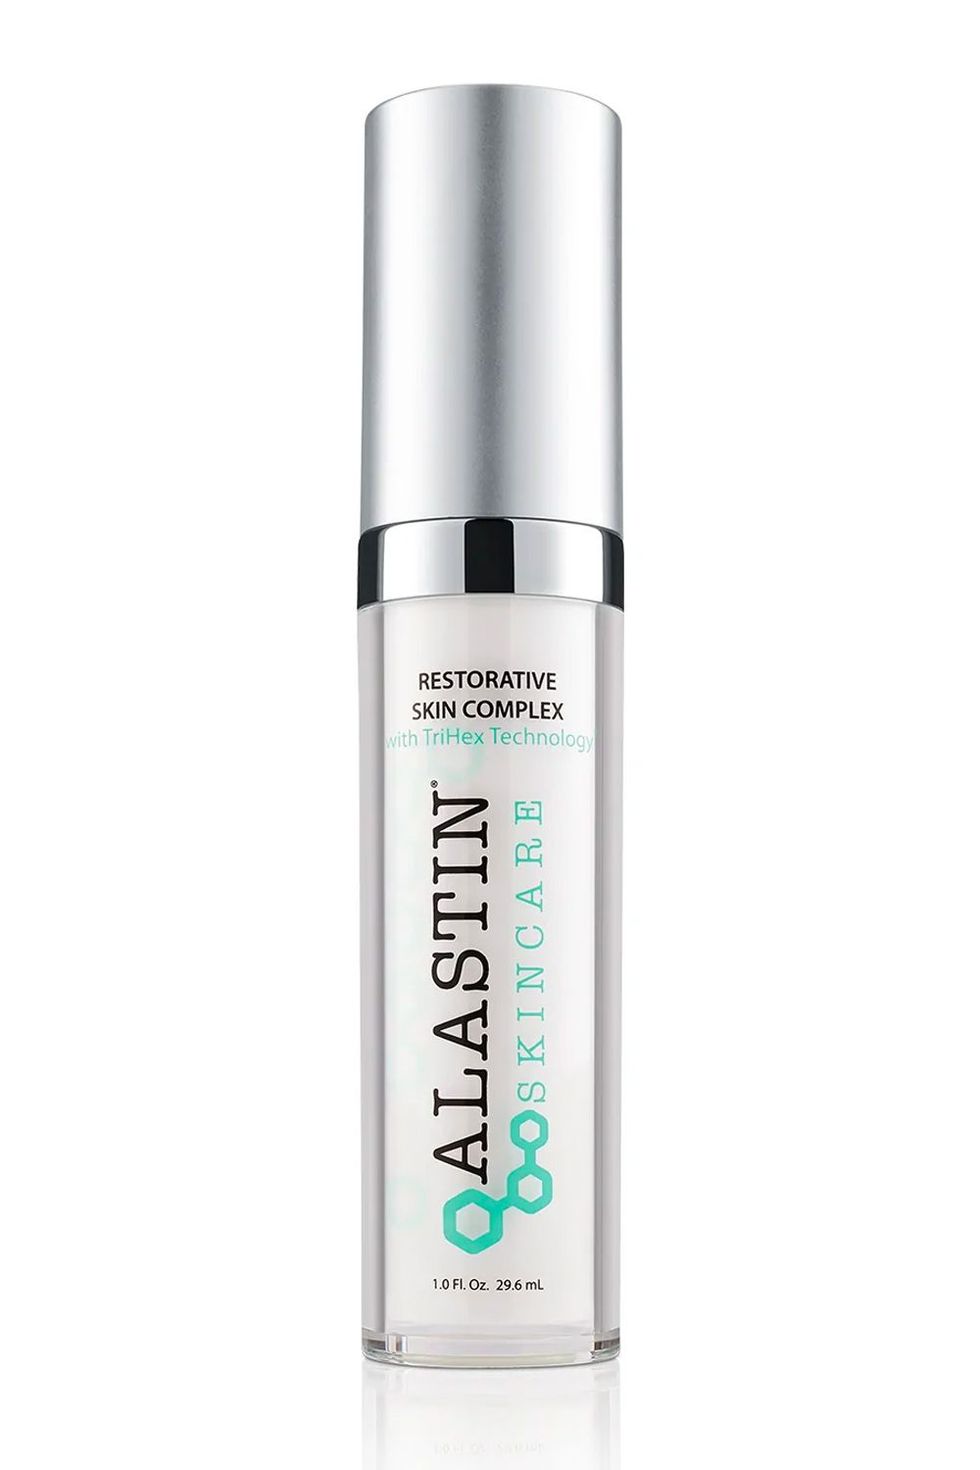 13 Best Anti-Aging Serums, Tested & Reviewed